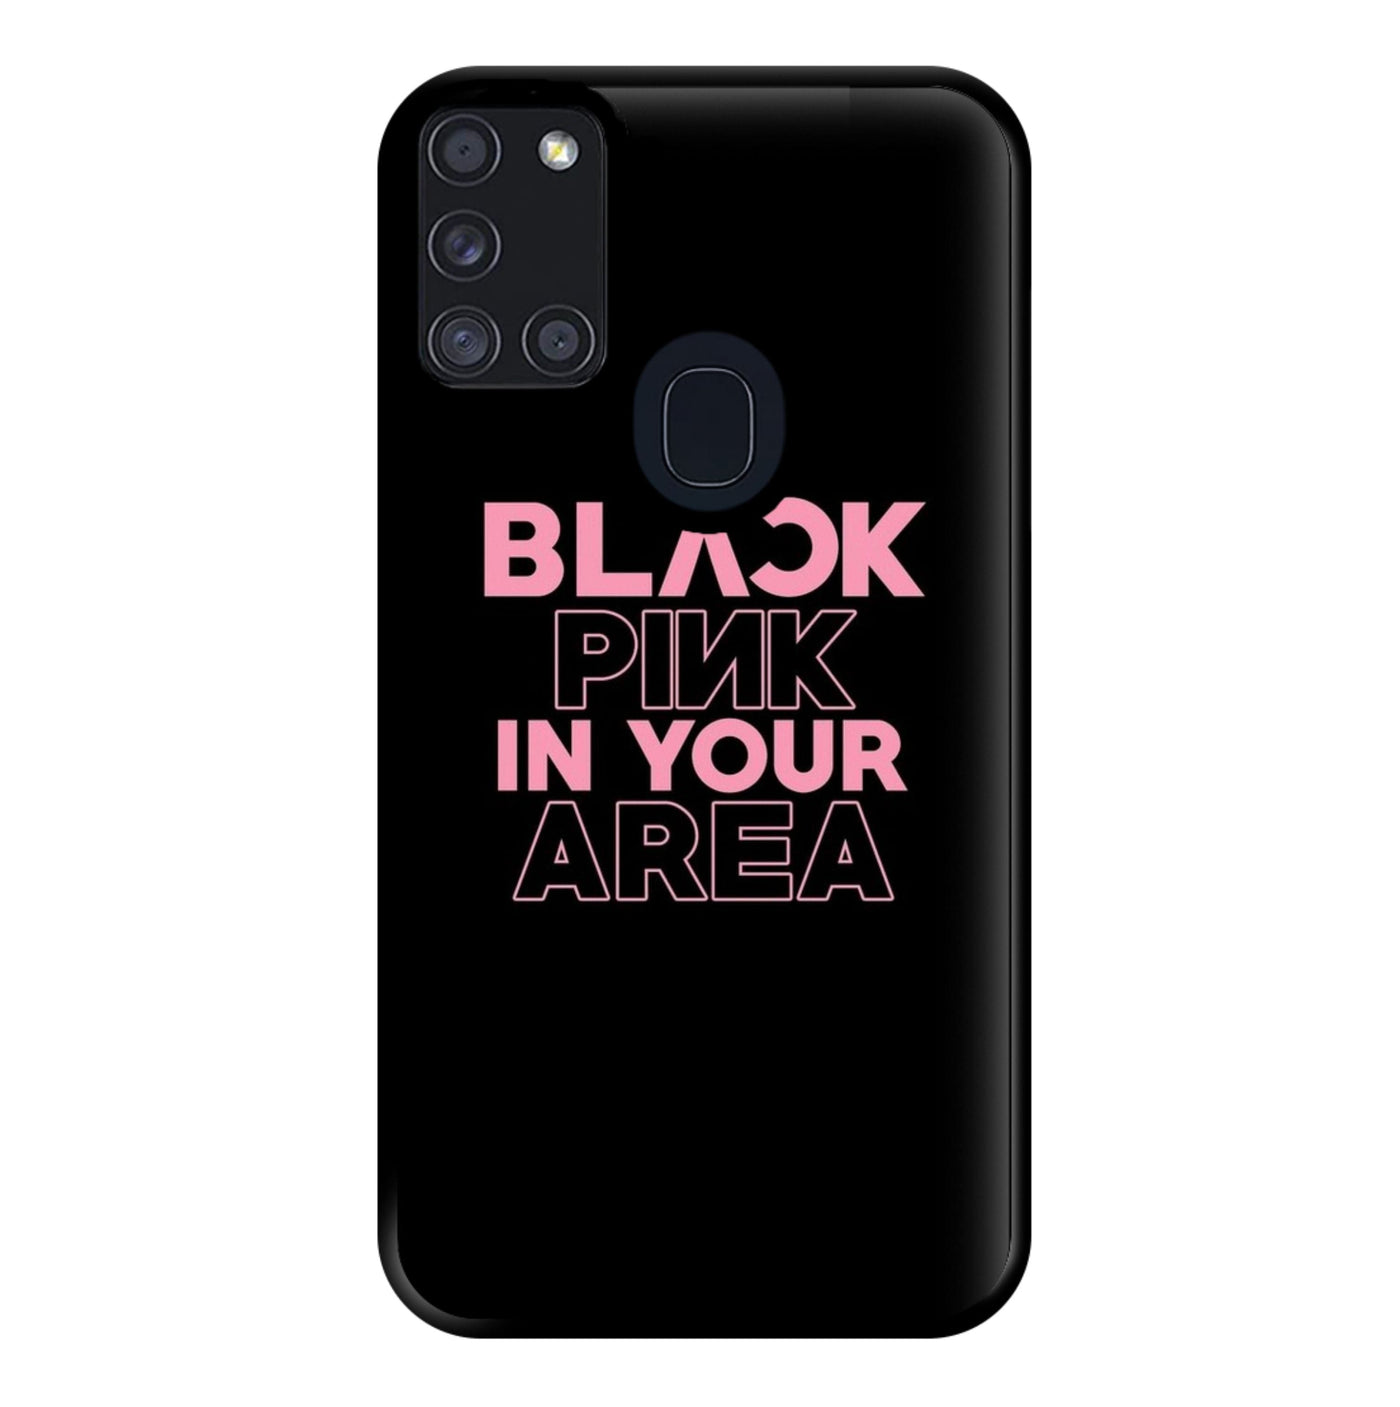 Blackpink In Your Area - Black Phone Case